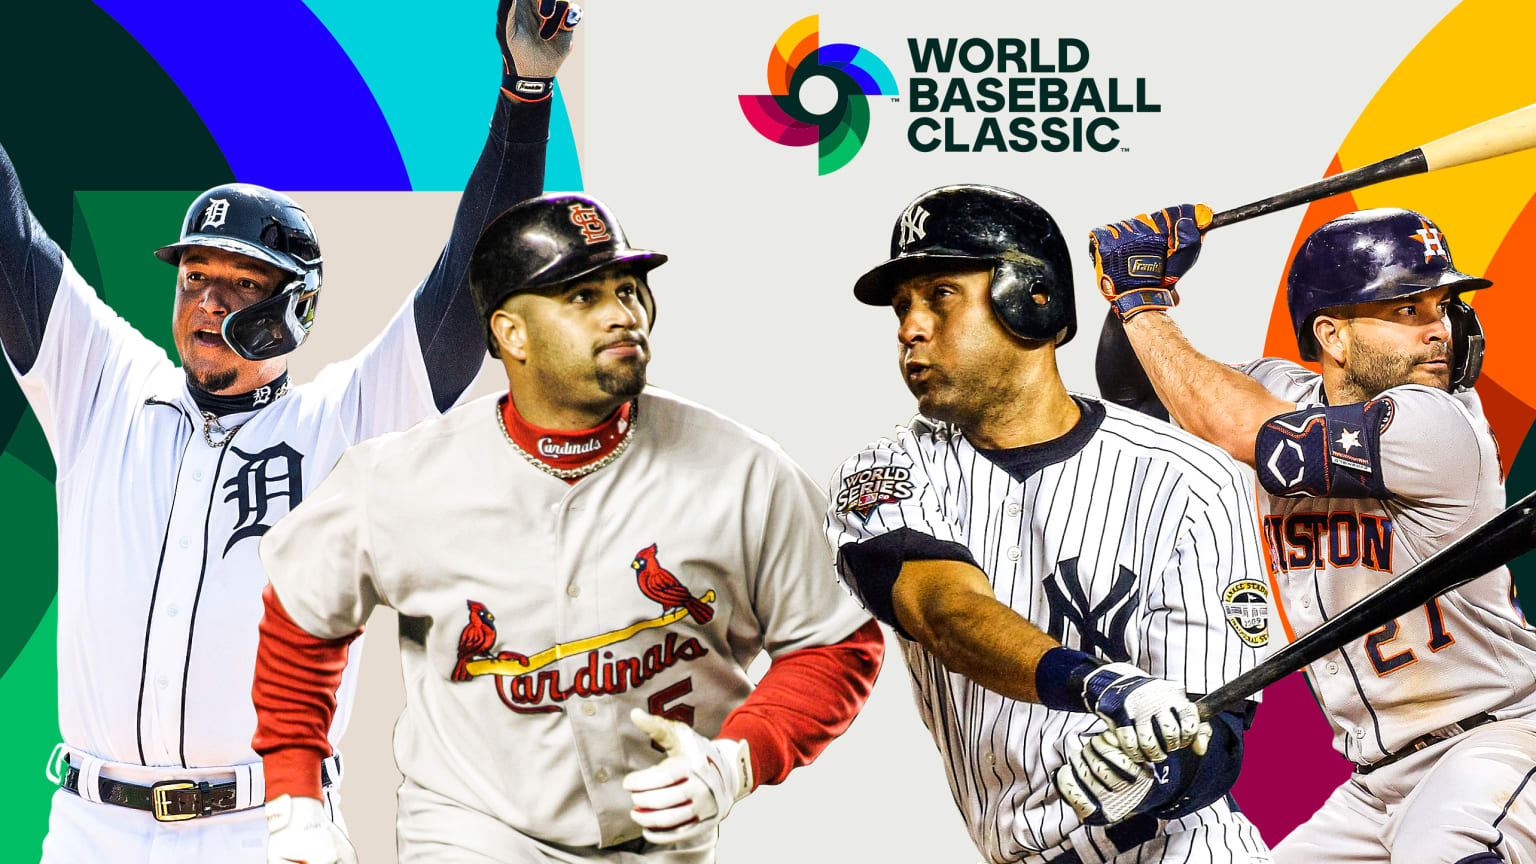 Miguel Cabrera, Albert Pujols, Derek Jeter and Jose Altuve are pictured with the World Baseball Classic logo above them